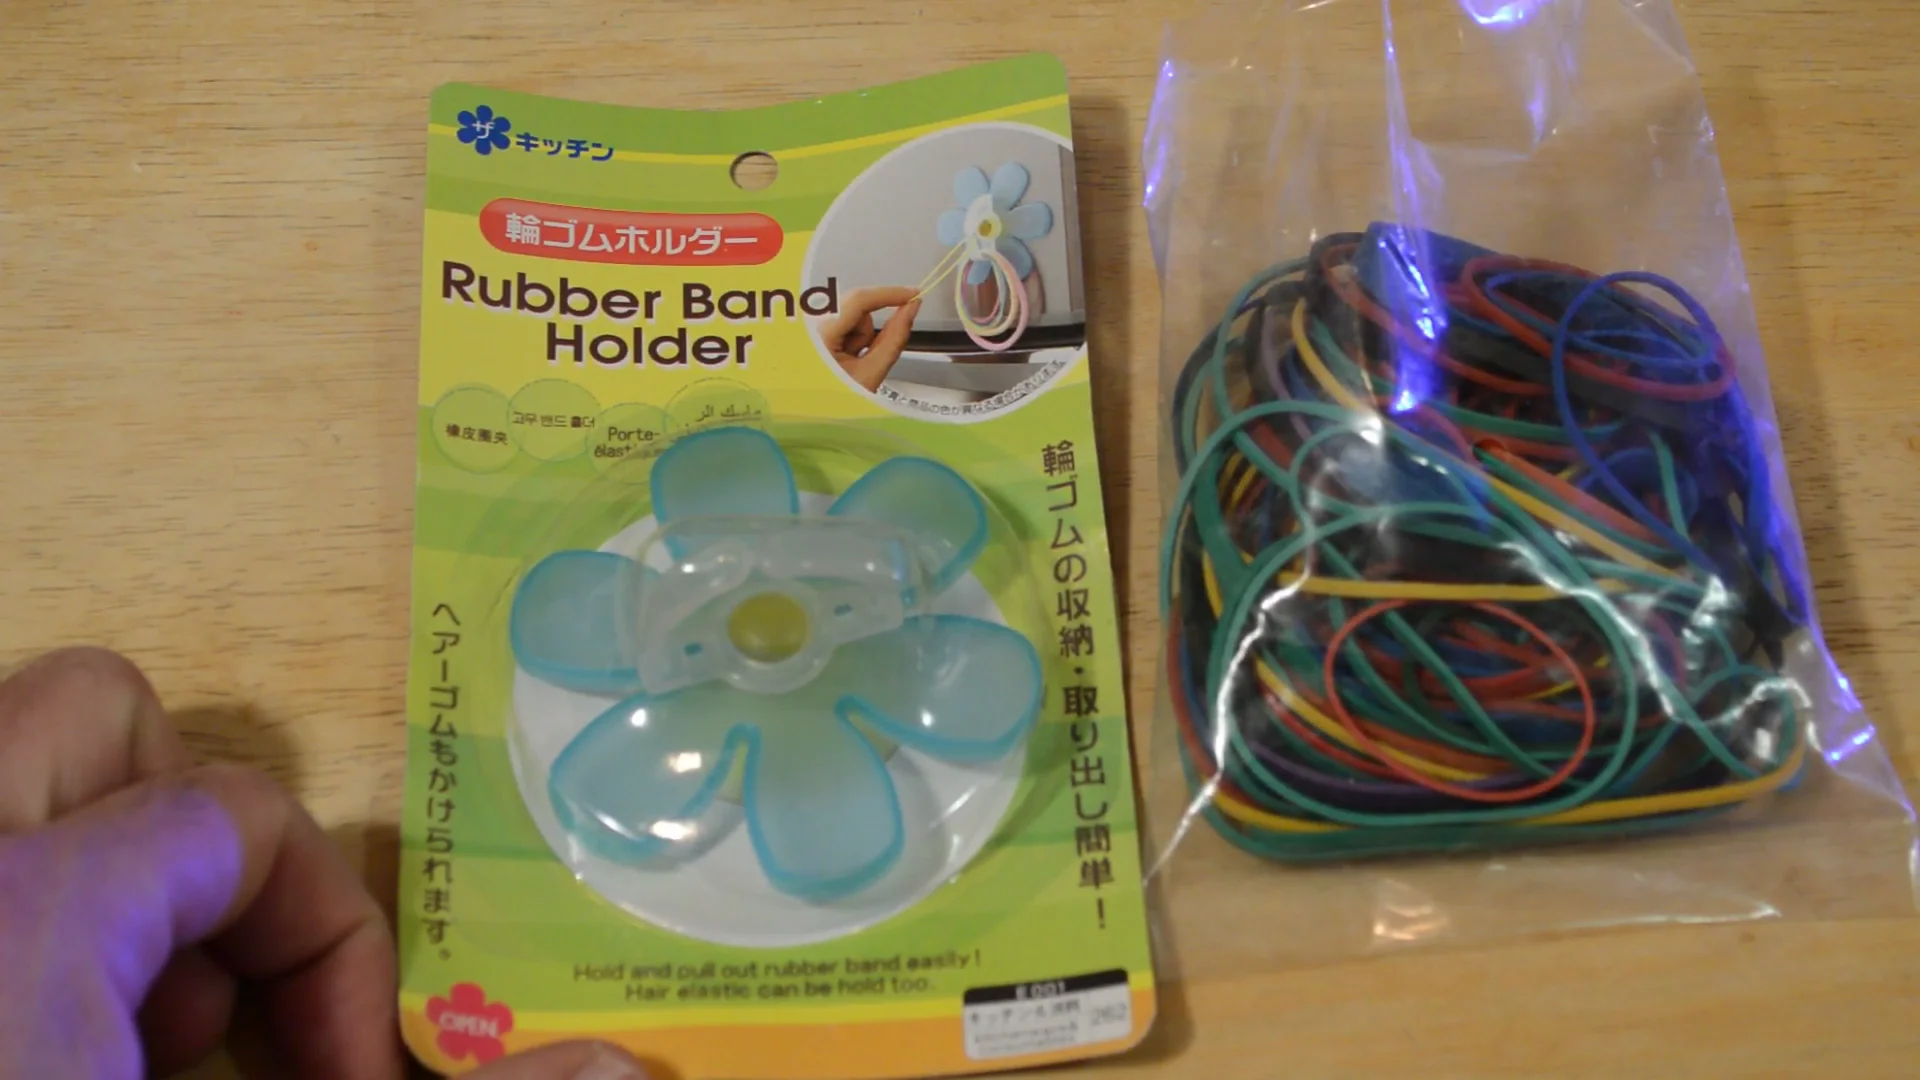 Daiso Hand Mixer Blender Review on Vimeo